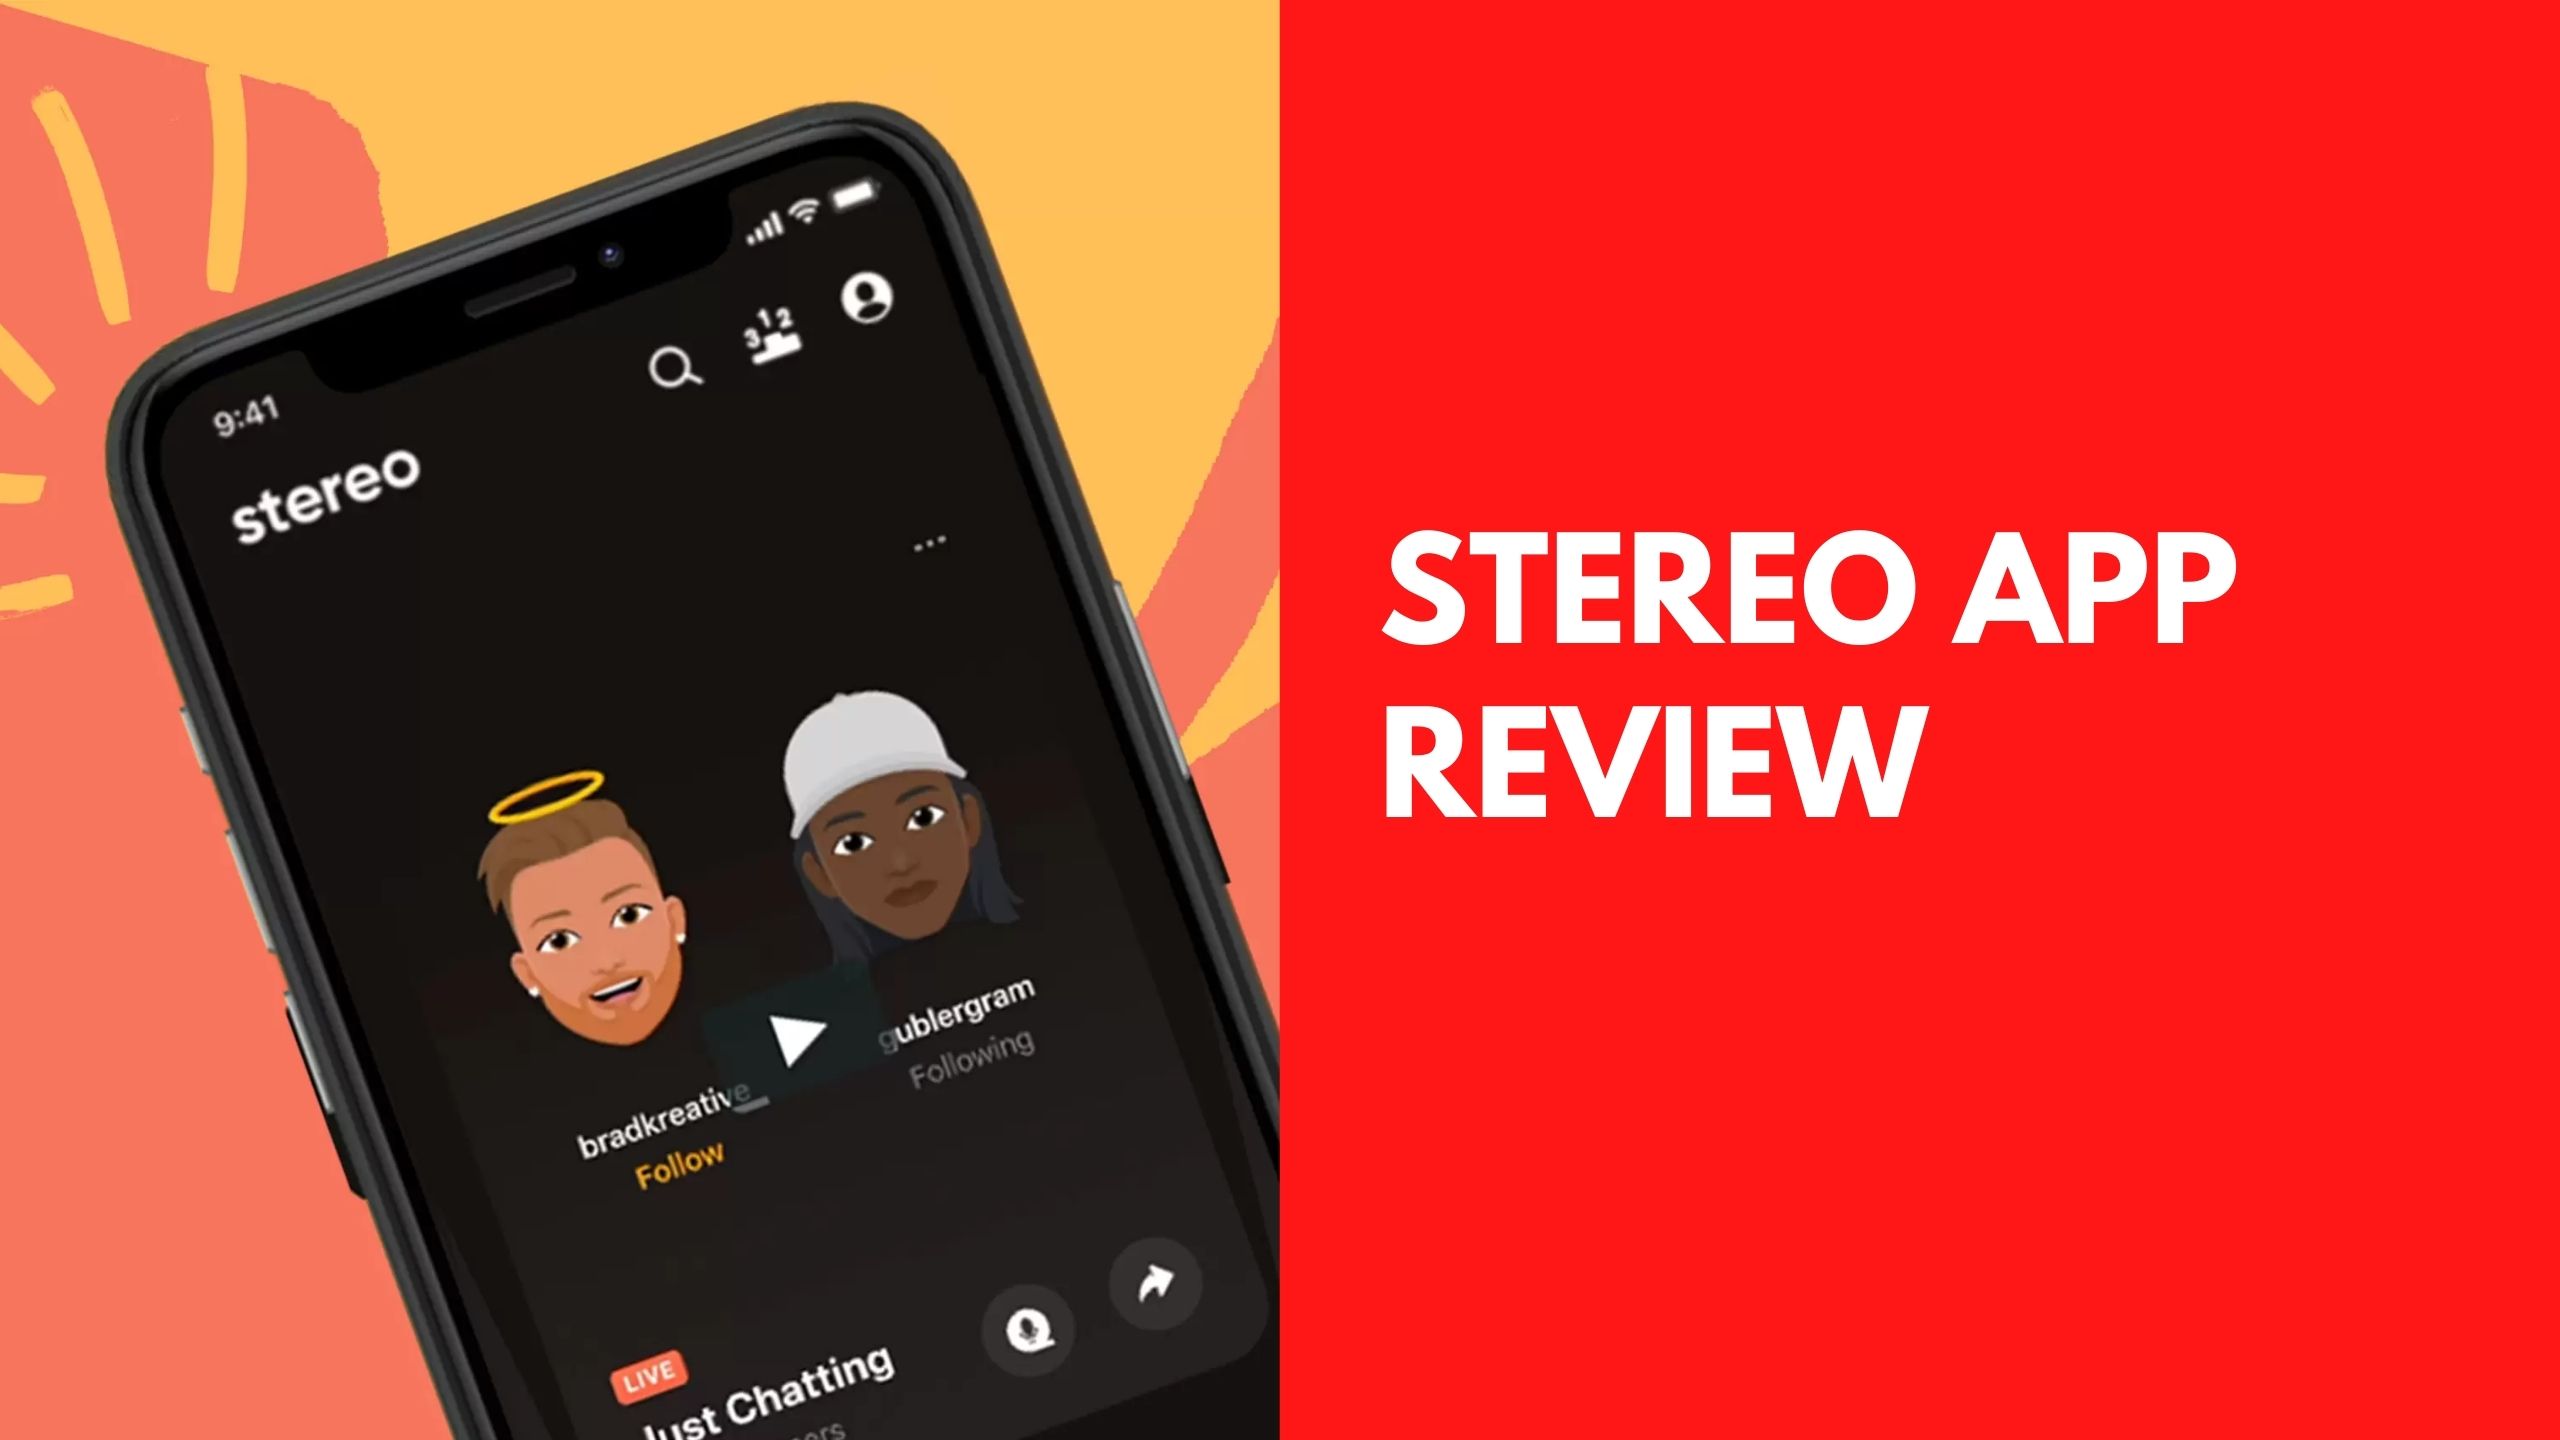 Stereo App Review